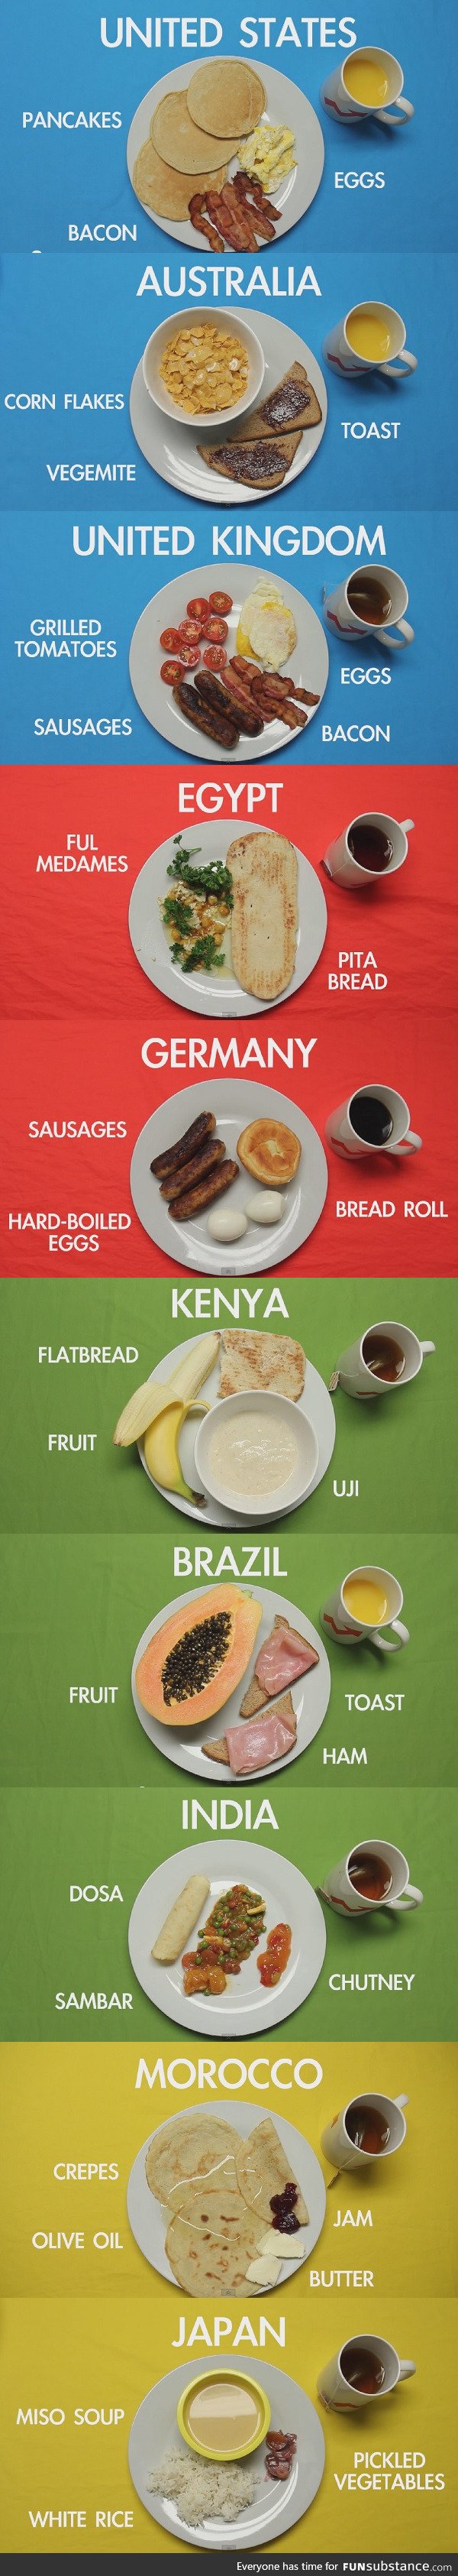 What Do People In Different Countries Eat For Breakfast